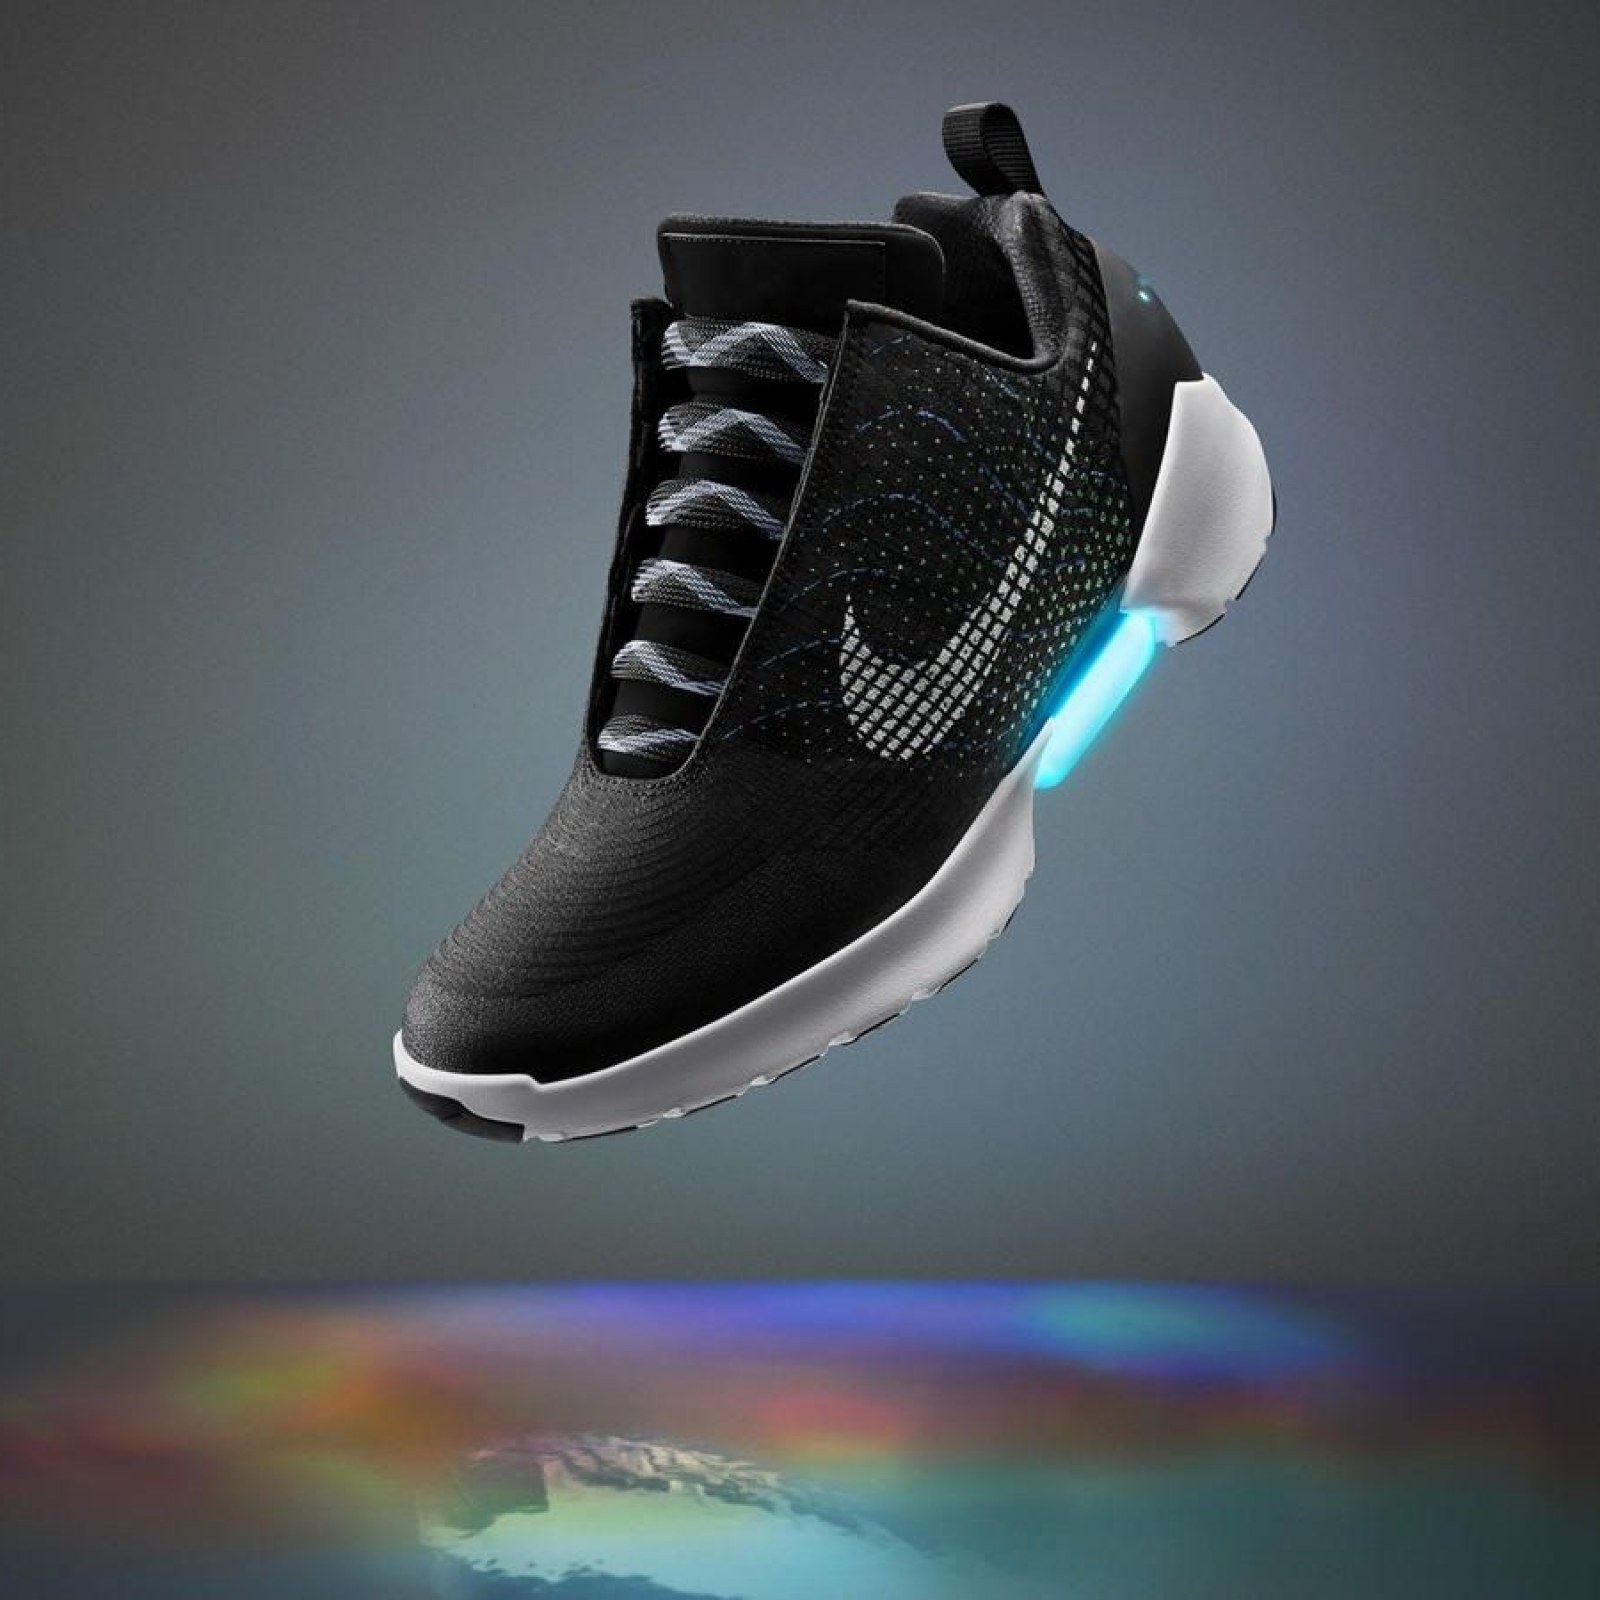 Nike Unveils First Self-Tying Shoes